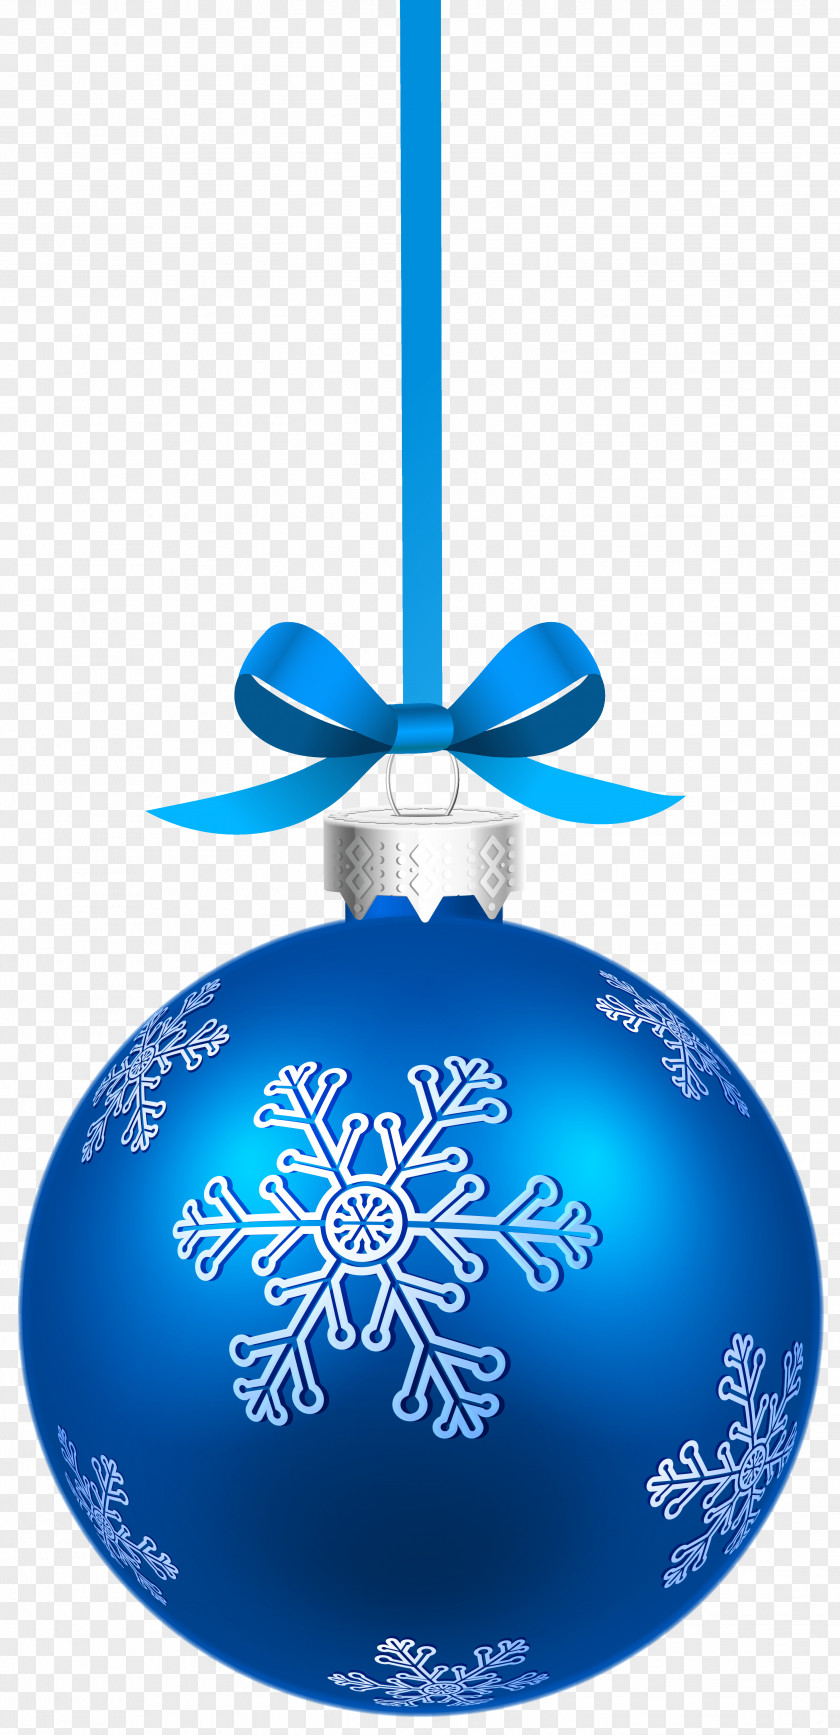 Blue Christmas Hanging Ball With Snowflakes Clipart Image Ornament Decoration Clip Art PNG